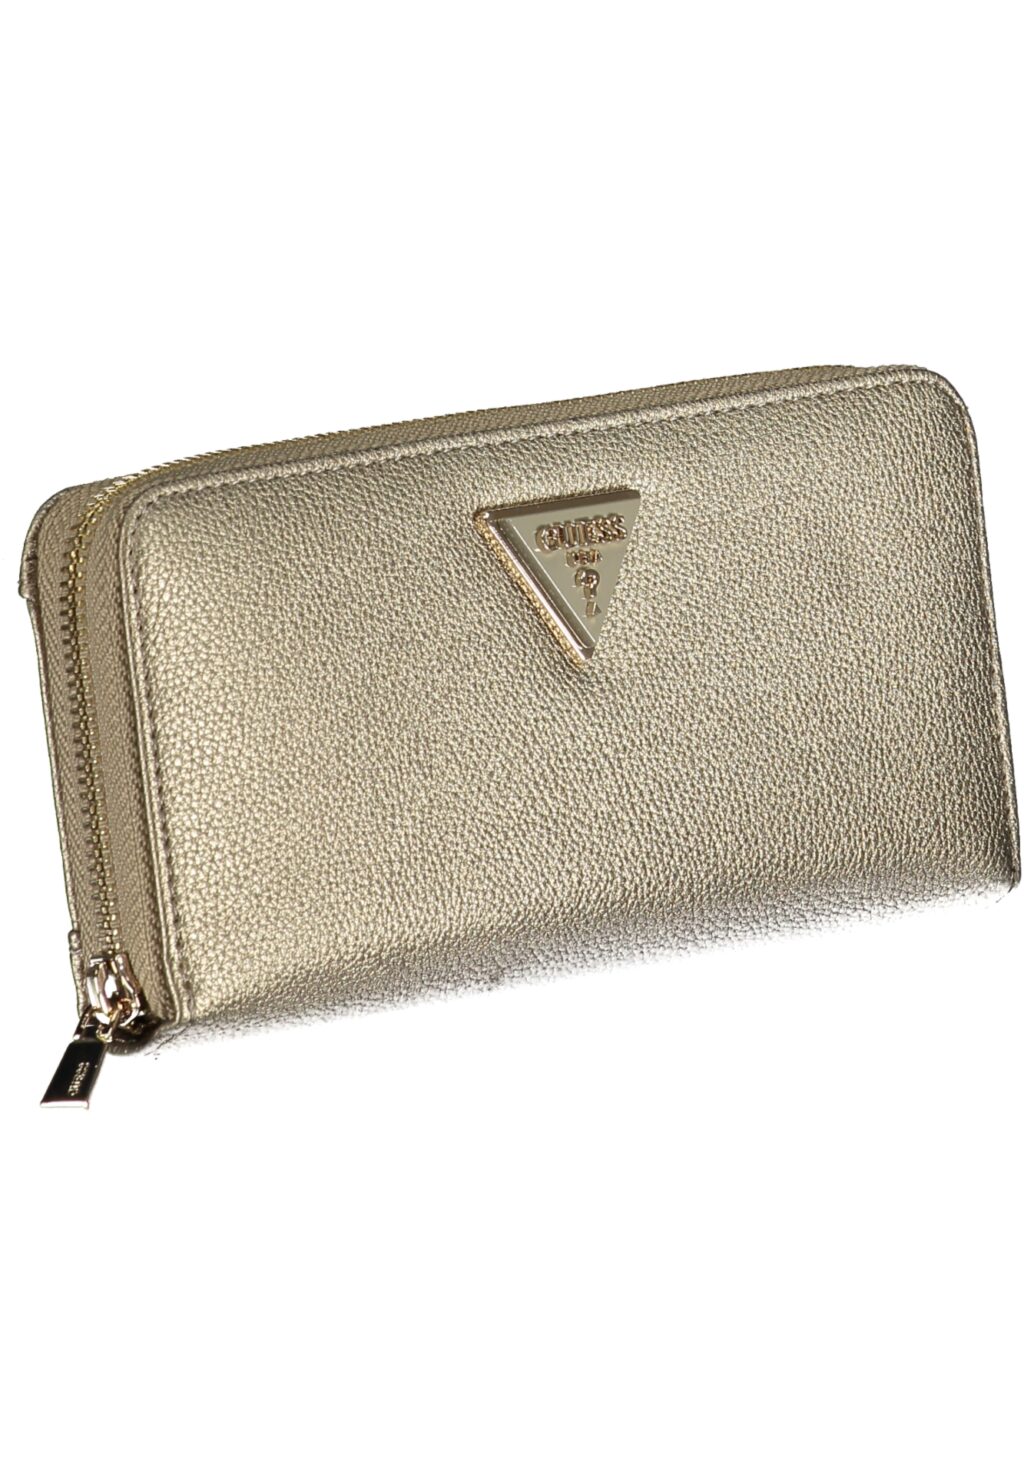 GUESS JEANS WOMEN'S WALLET GOLD BG877846_ORPEWTER